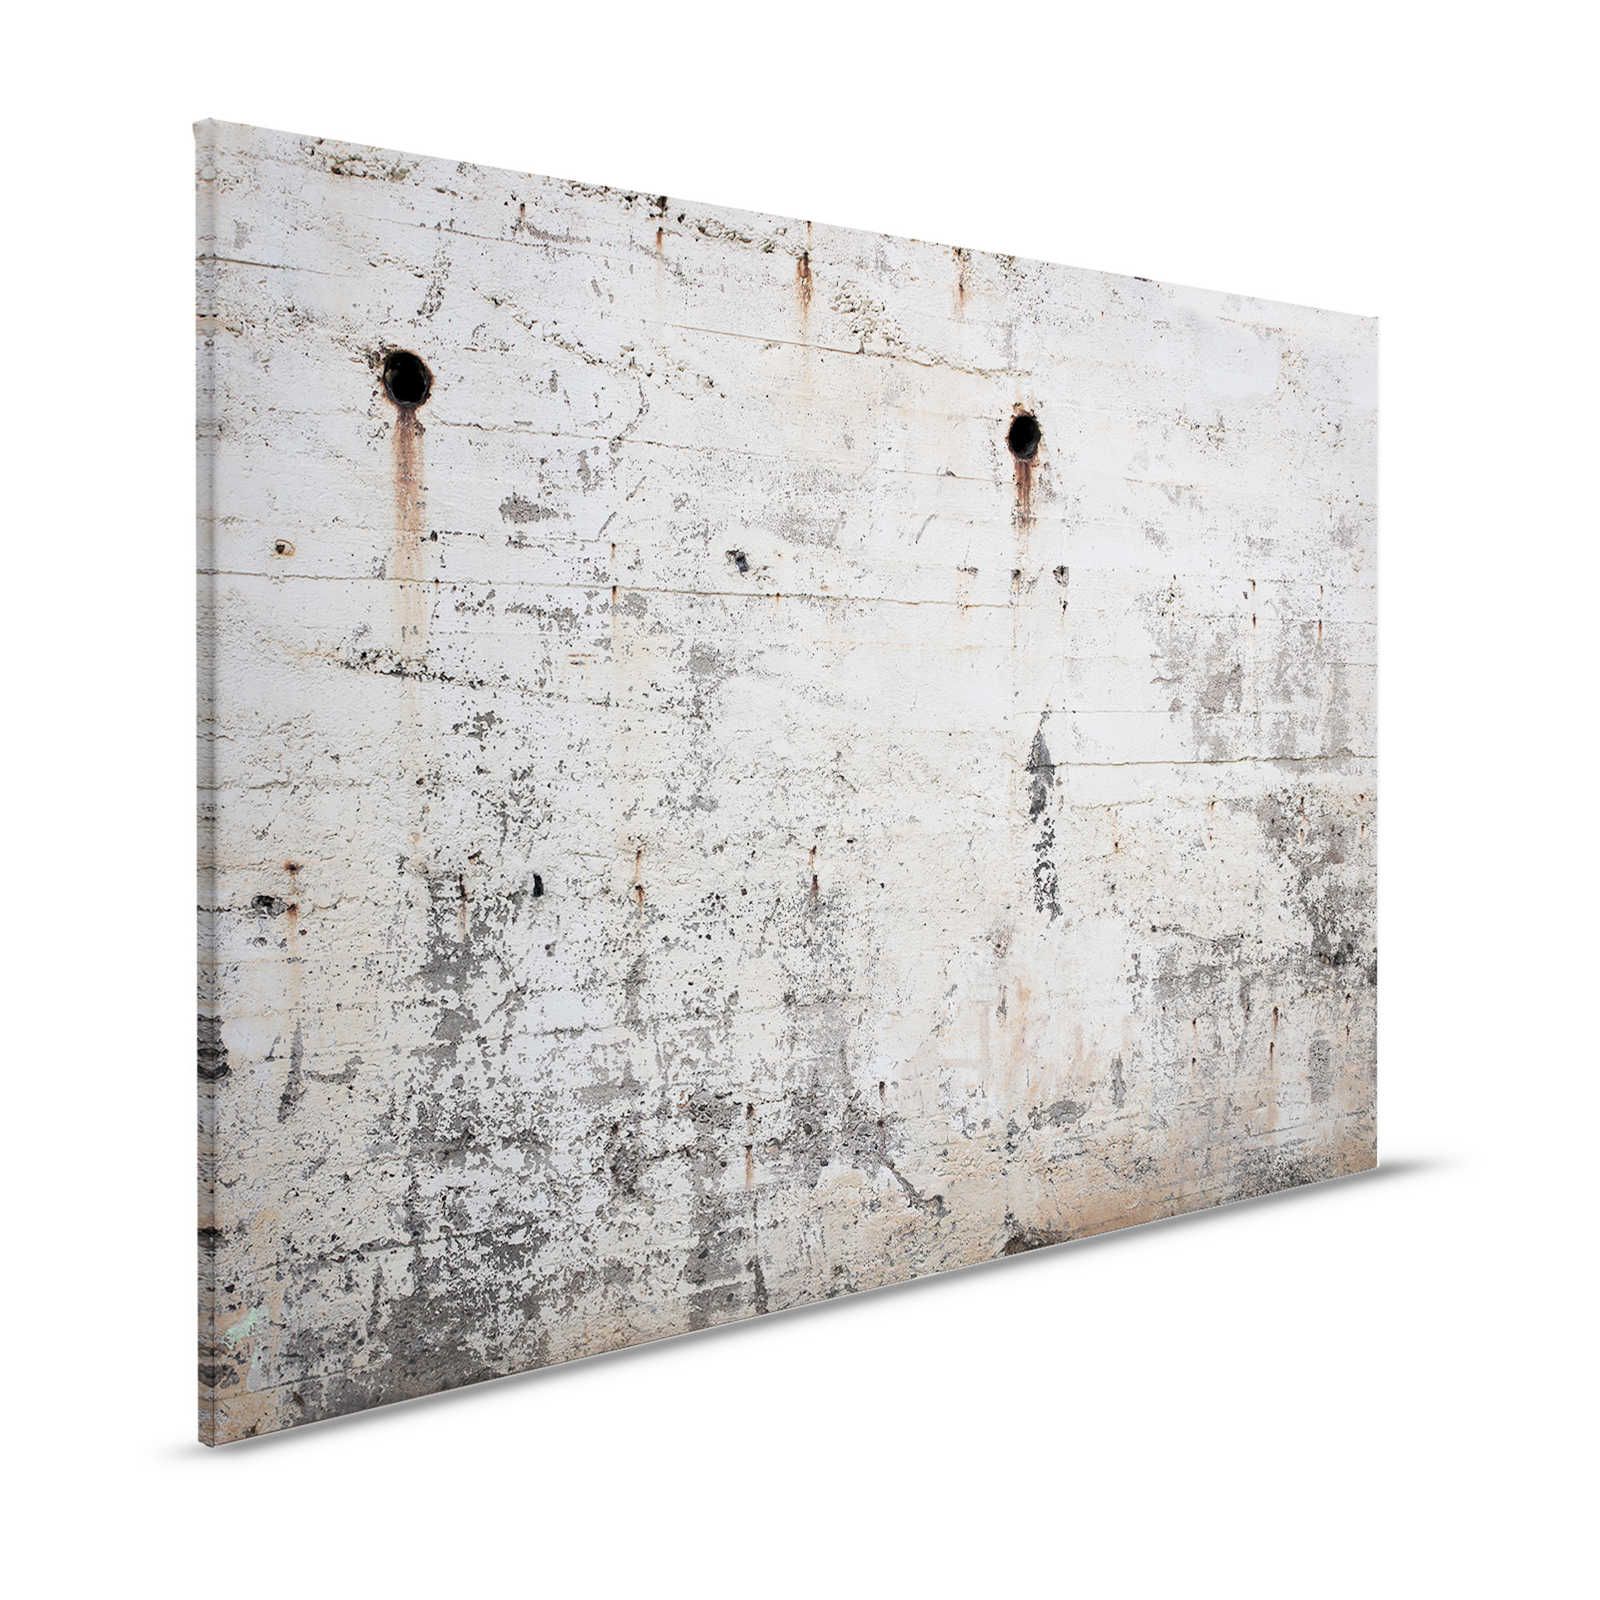 Canvas painting Industrial Look Concrete with Used Look - 1.20 m x 0.80 m
